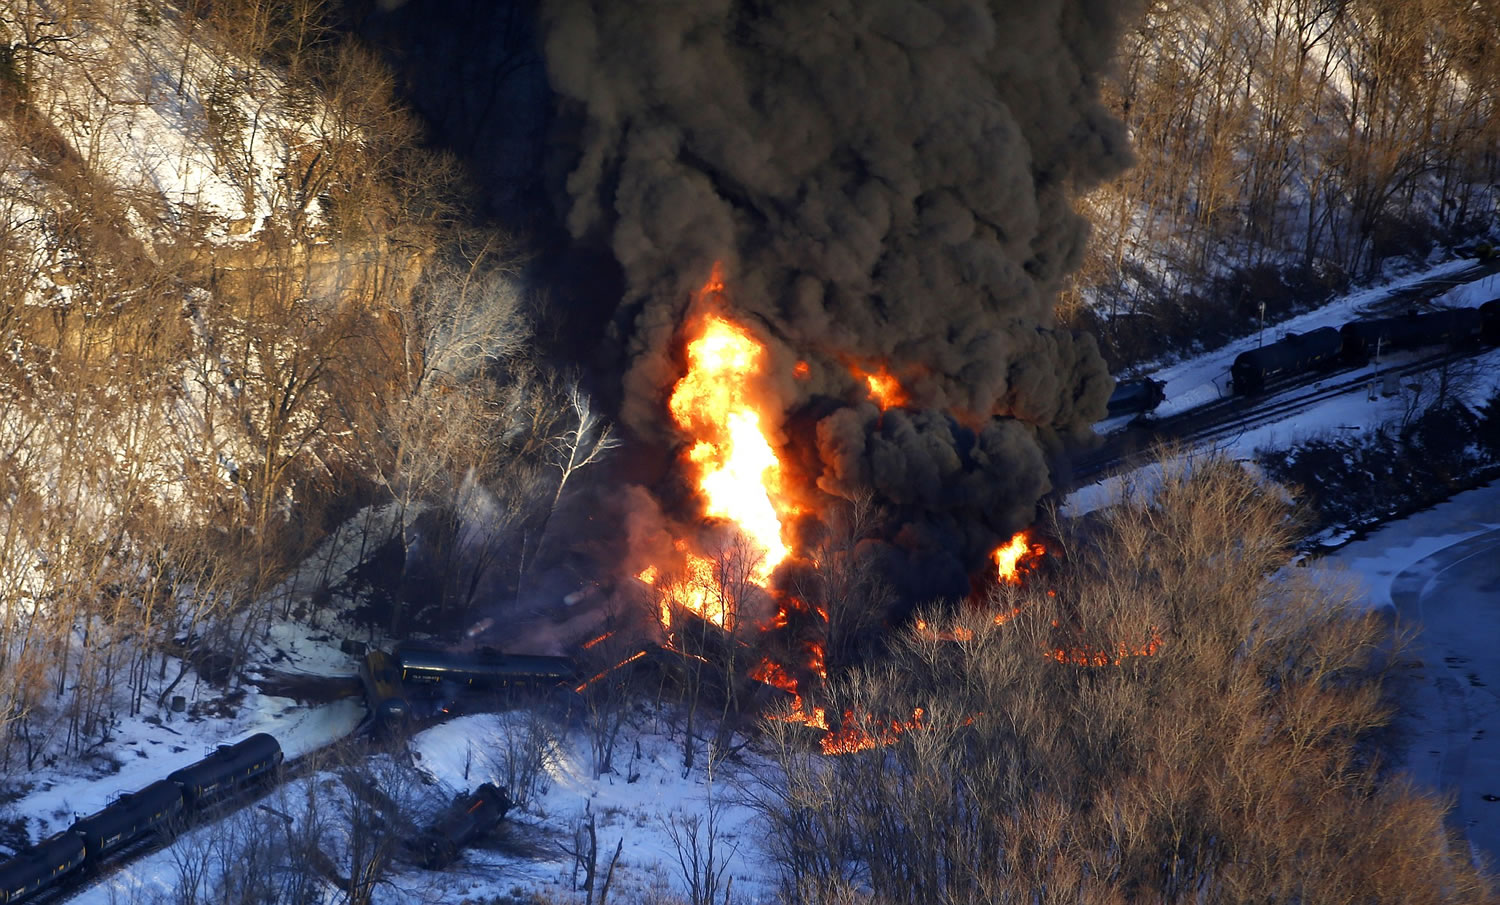 Smoke and flames erupt from the scene of a train derailment Thursday near Galena, Ill. A BNSF Railway freight train loaded with crude oil derailed around 1:20 p.m. in a rural area where the Galena River meets the Mississippi, said Jo Daviess County Sheriff's Sgt. Mike Moser.